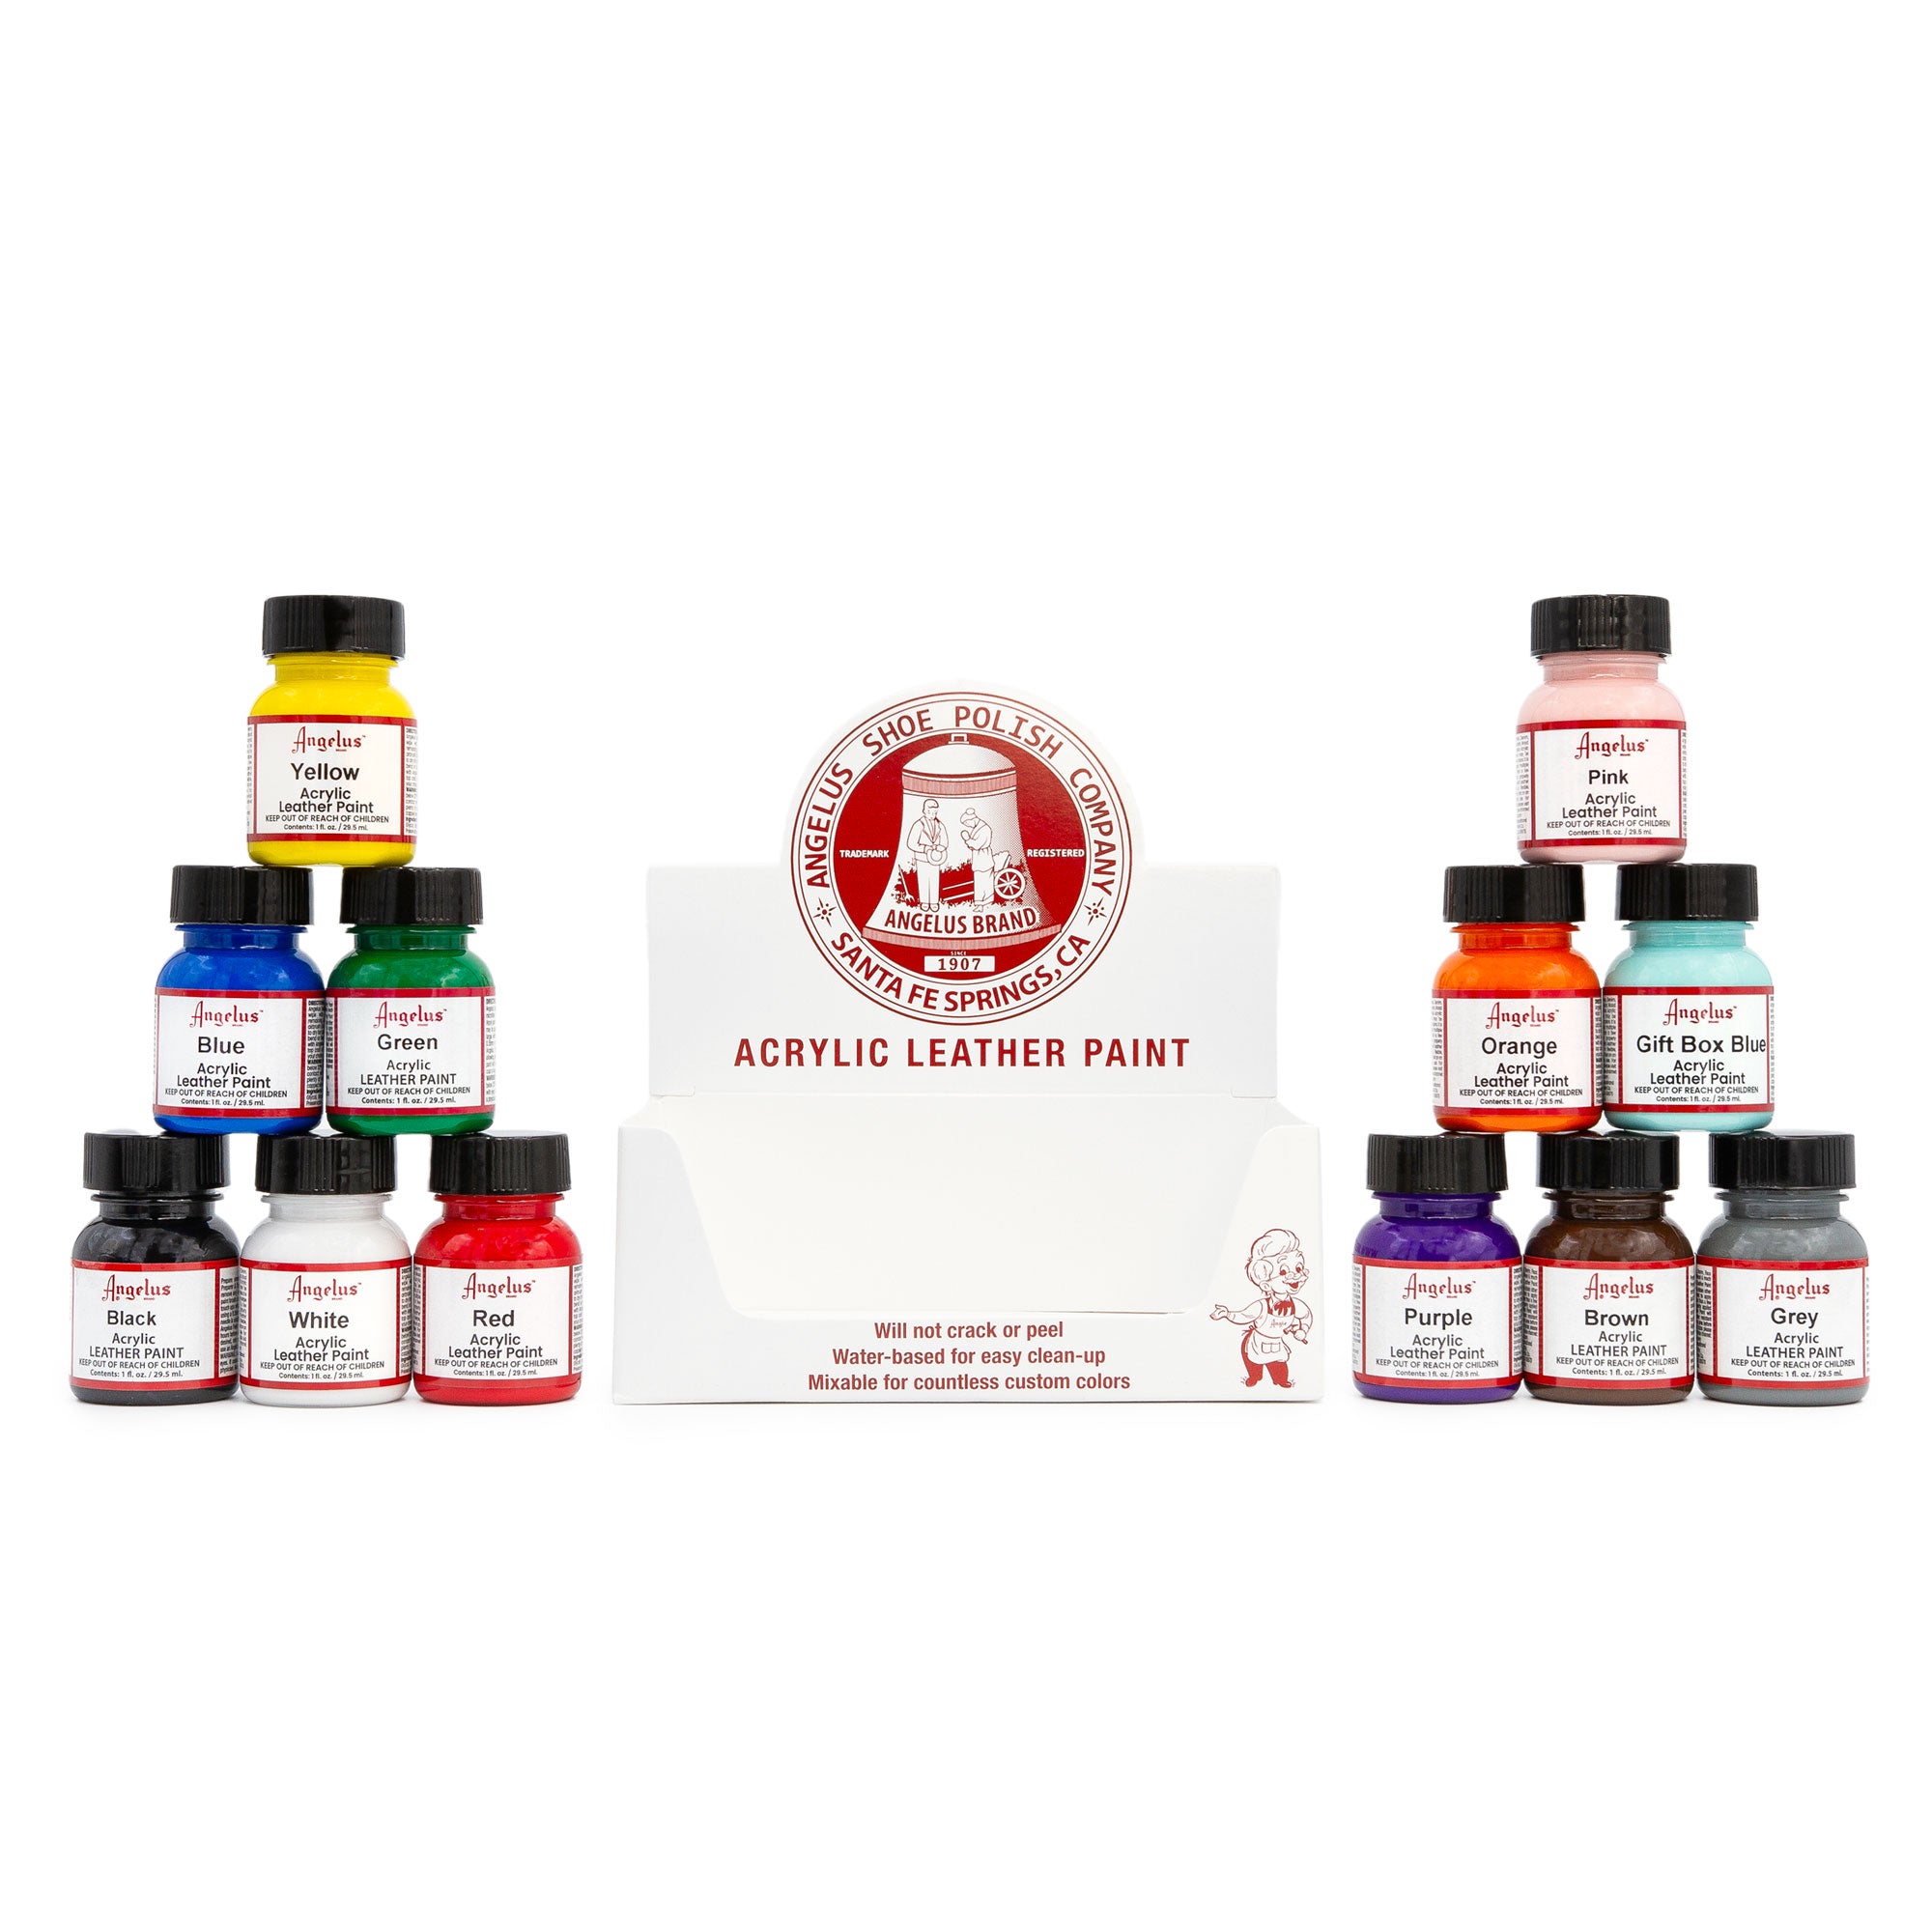 NEW! SNEAKER PAINT SOLVENT PACK!